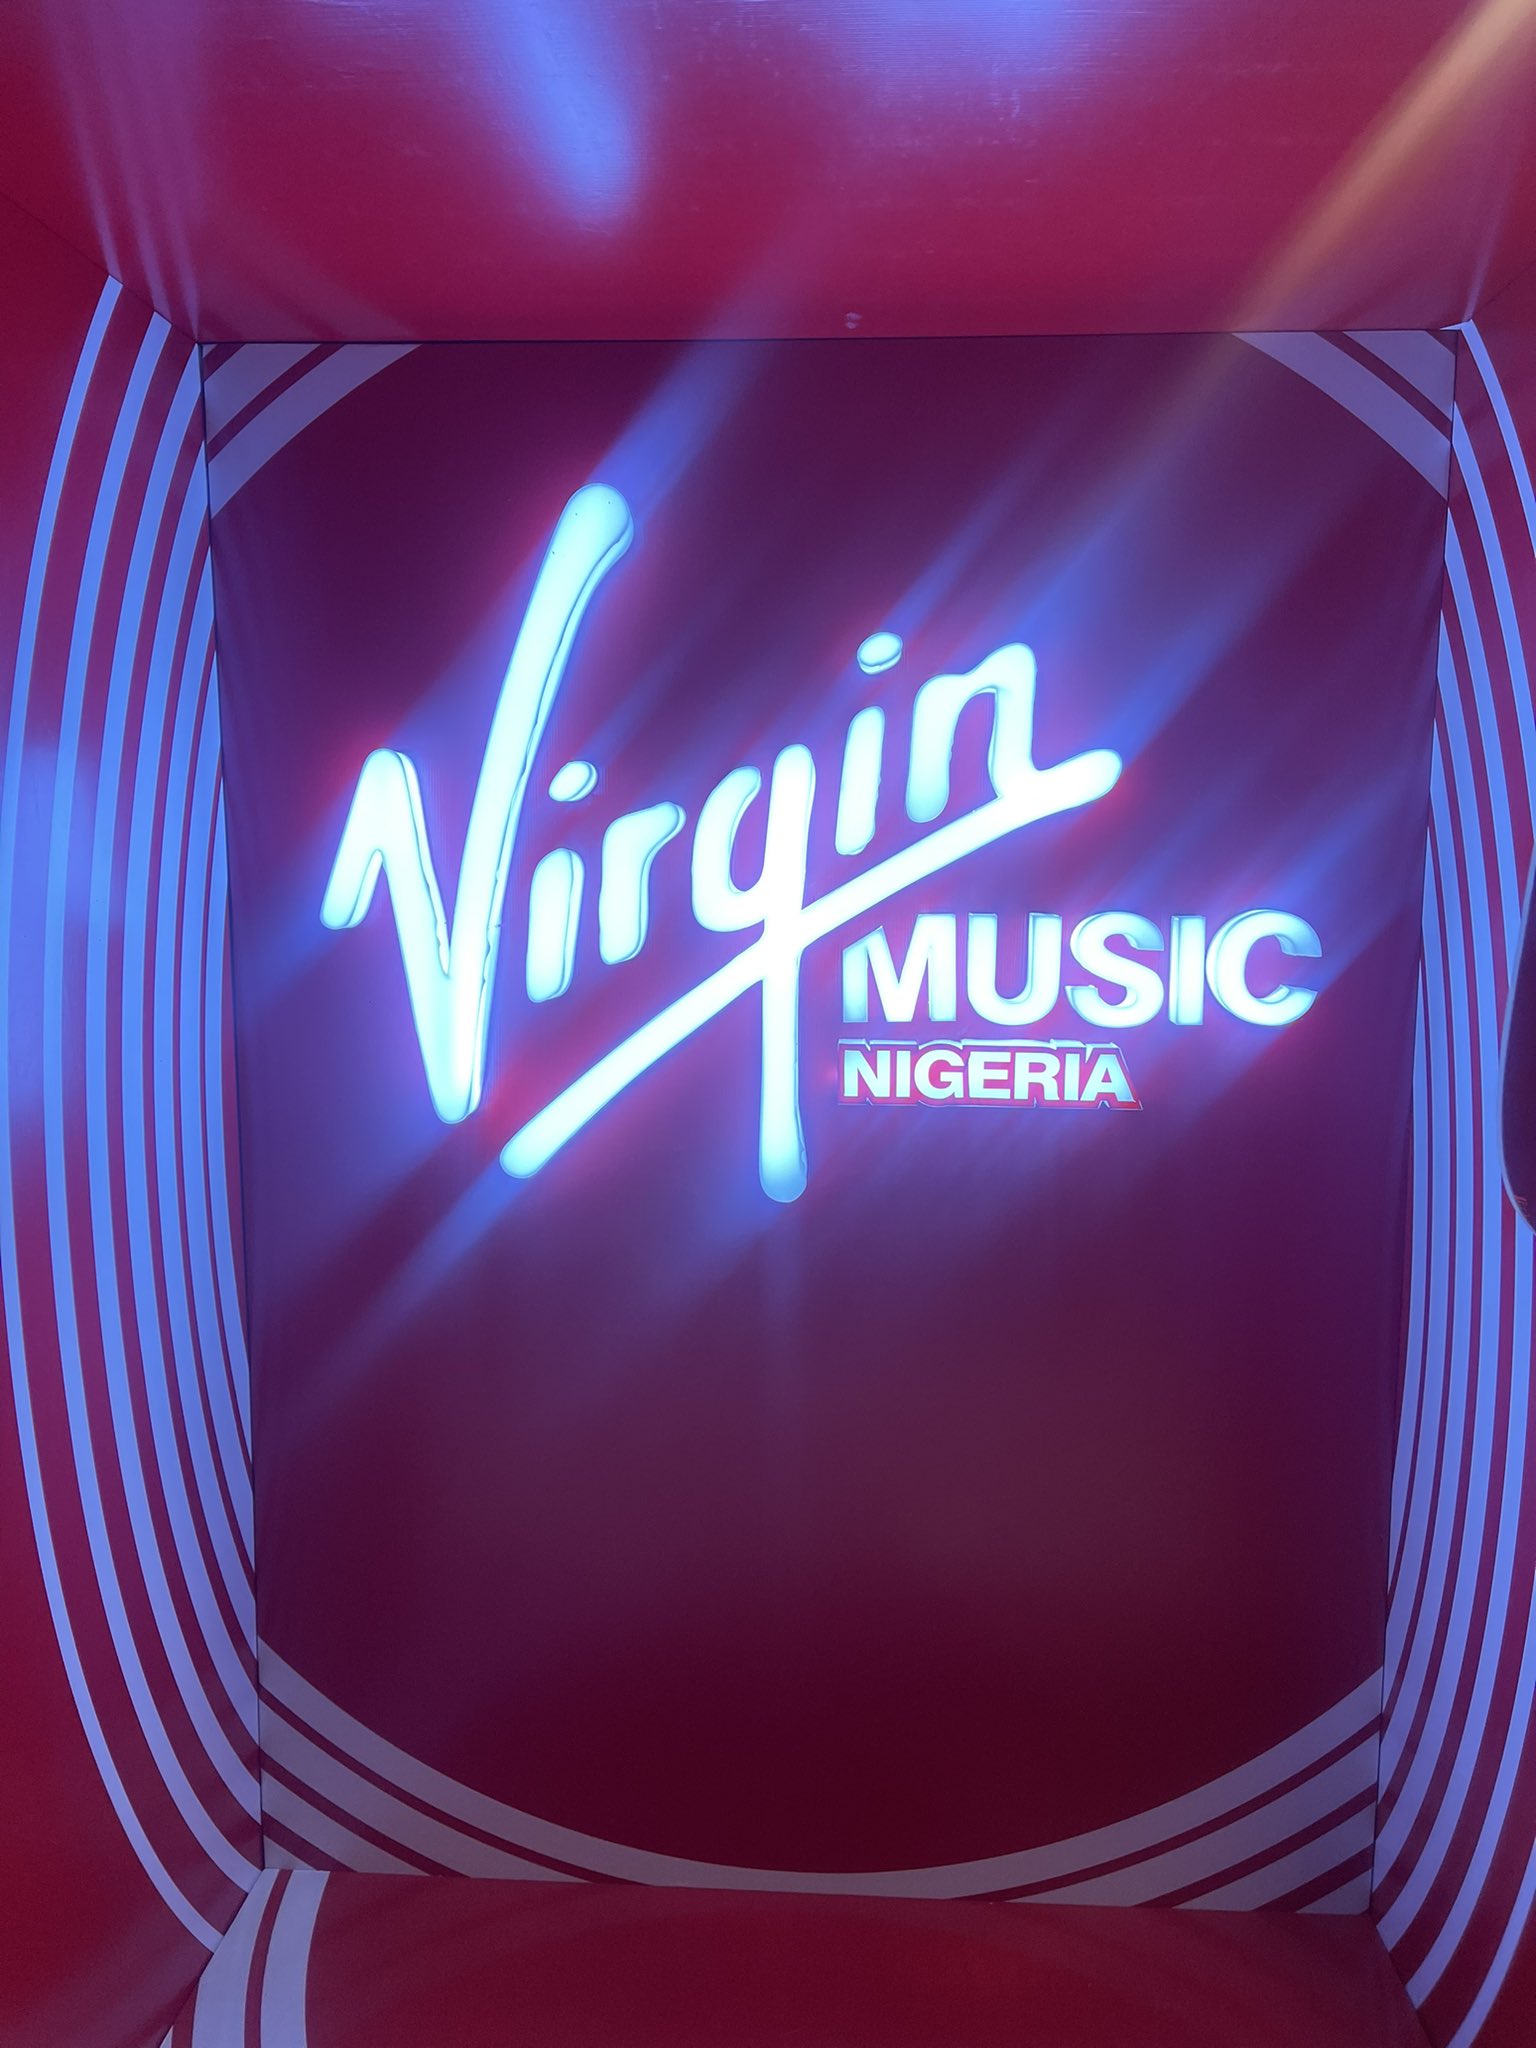 Virgin Music Group Establishes Nigeria Office, Appoints Olukorede Ikazoboh as Head Afrocritik